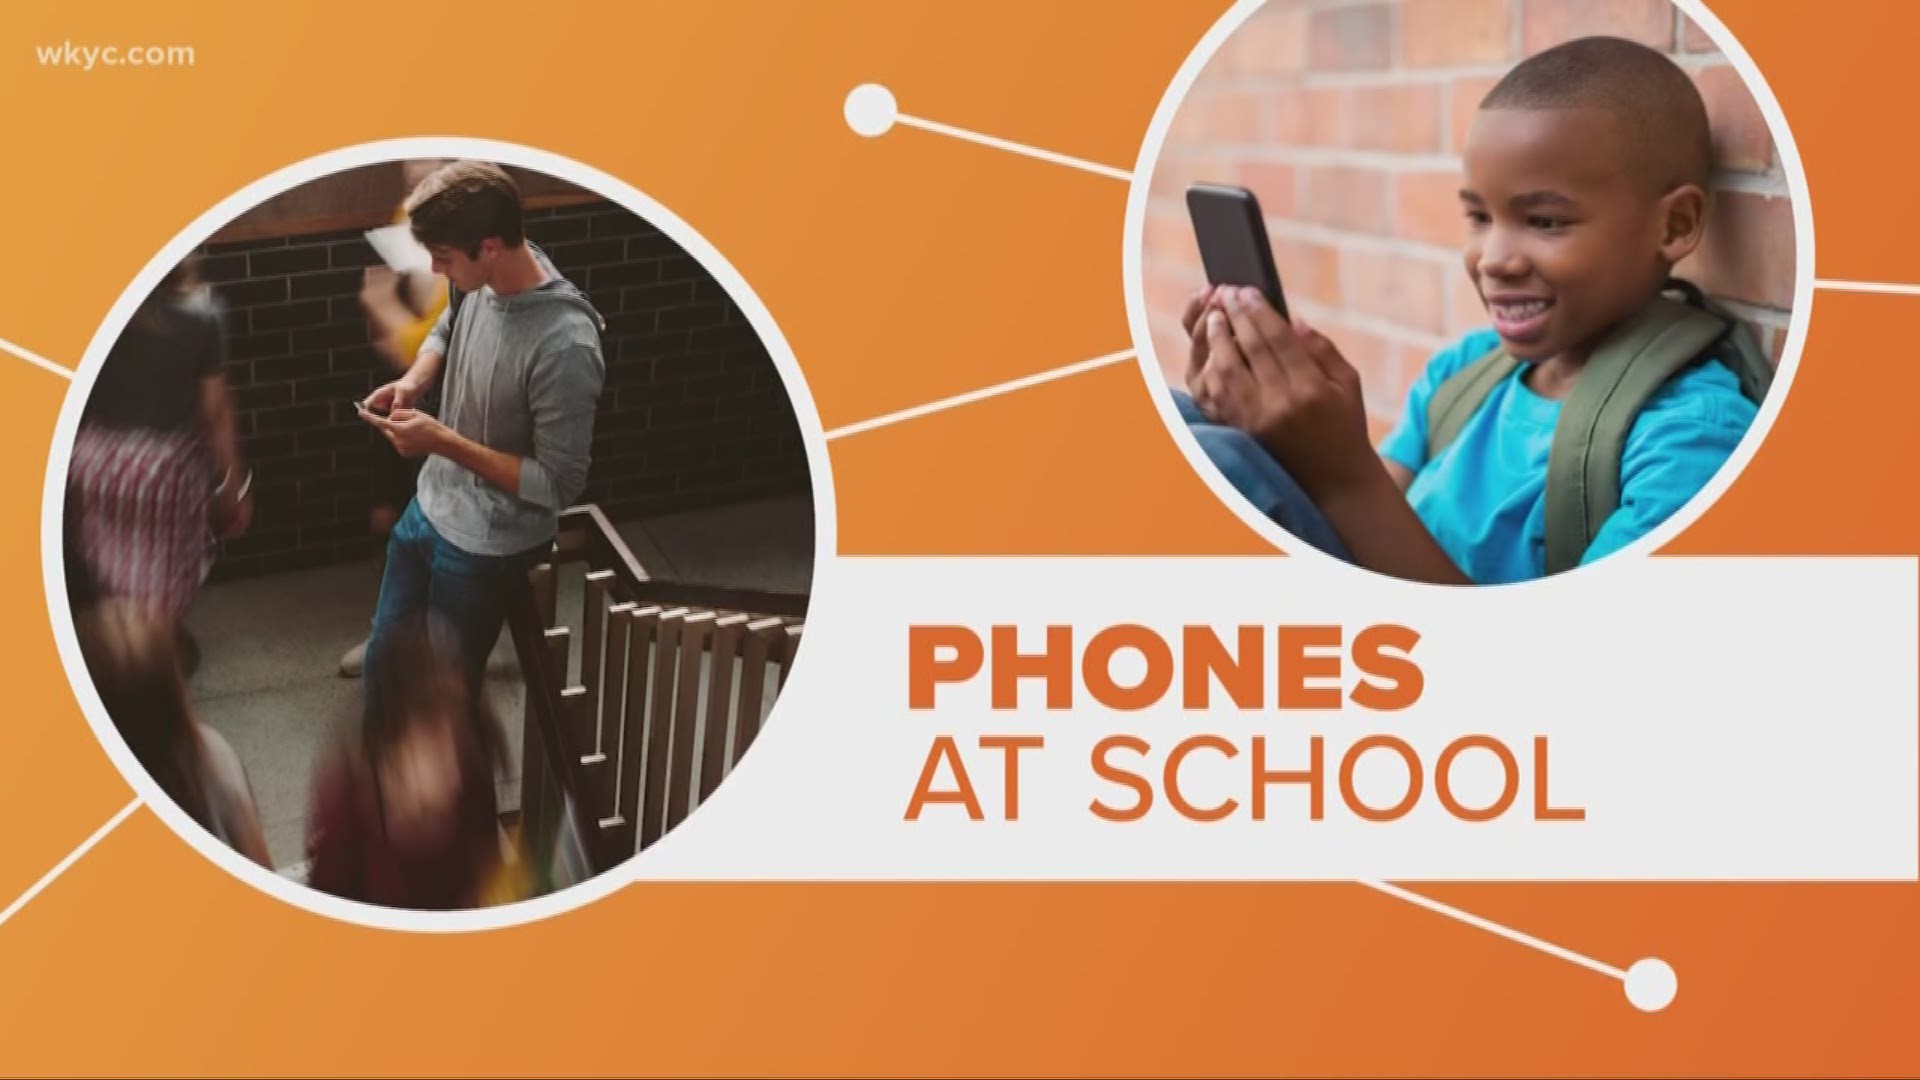 Aug. 20, 2019: Students are heading back to the classroom, but should your kids have their phone in school? We connect the dots... What do you think is the right age for children to have a phone?